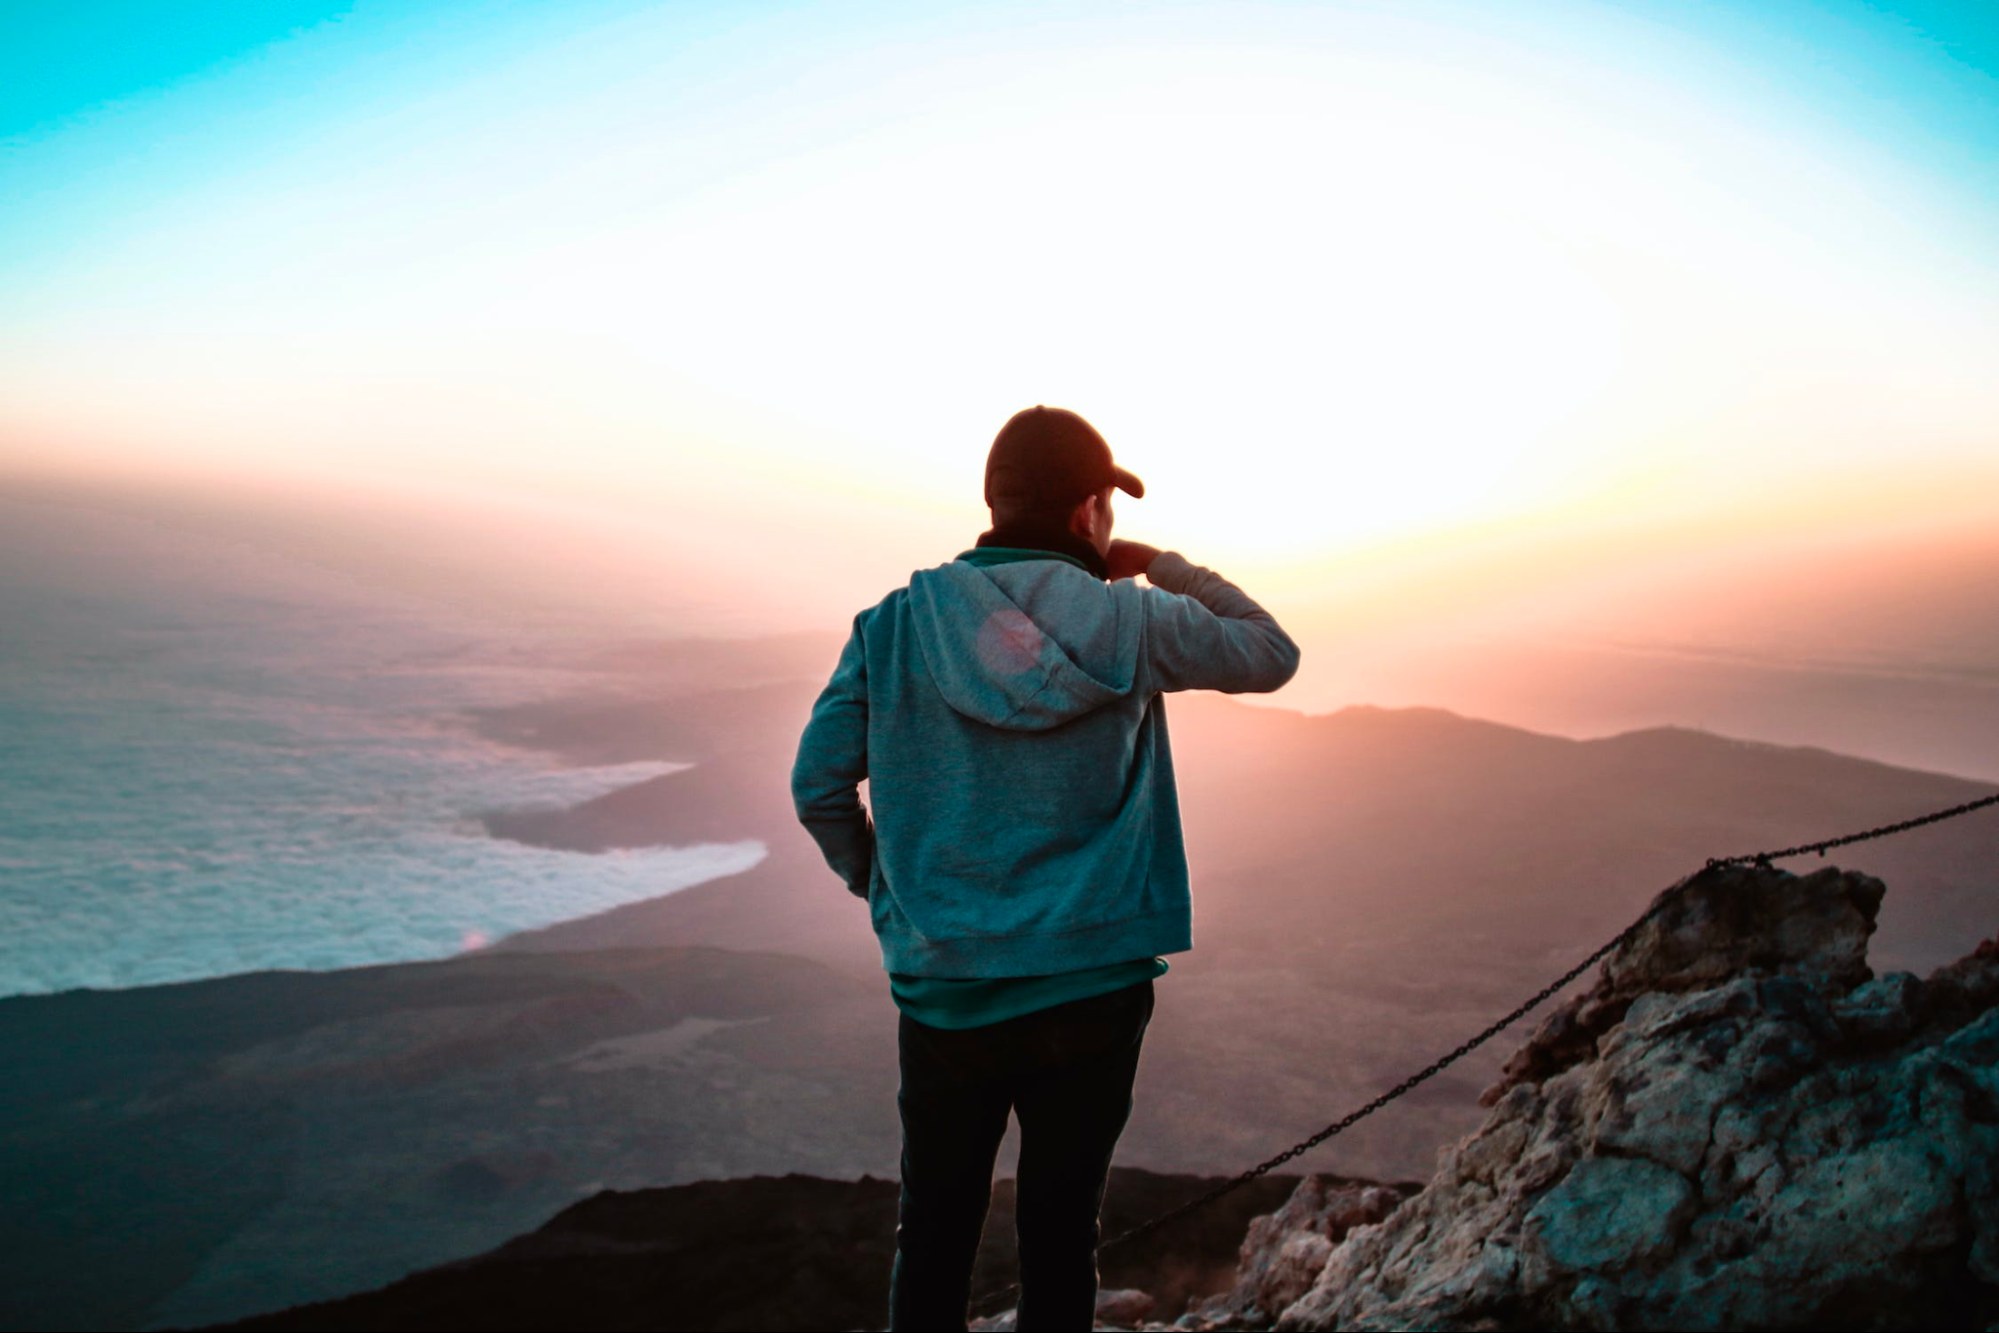 This is an image of someone standing at the top of a mountain, gazing at the view.